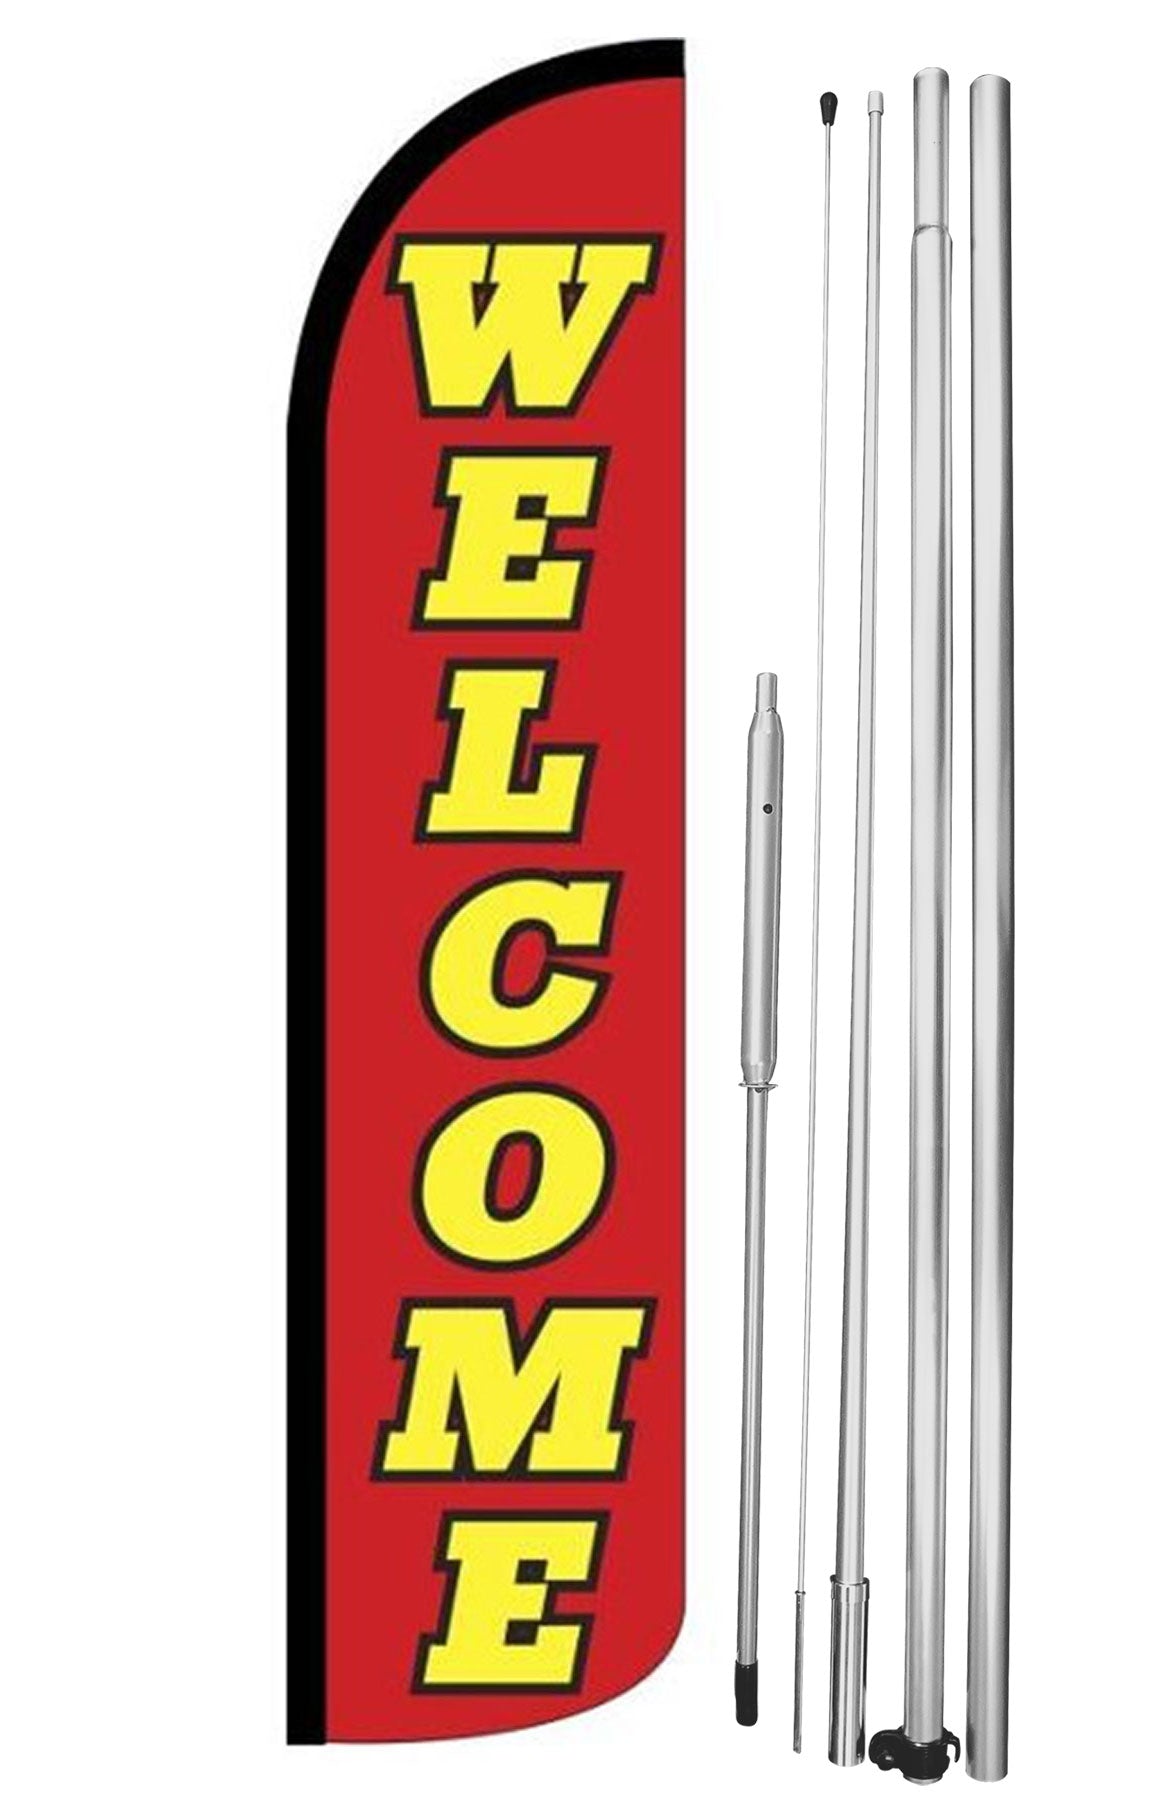 WELCOME (RED & YELLOW)